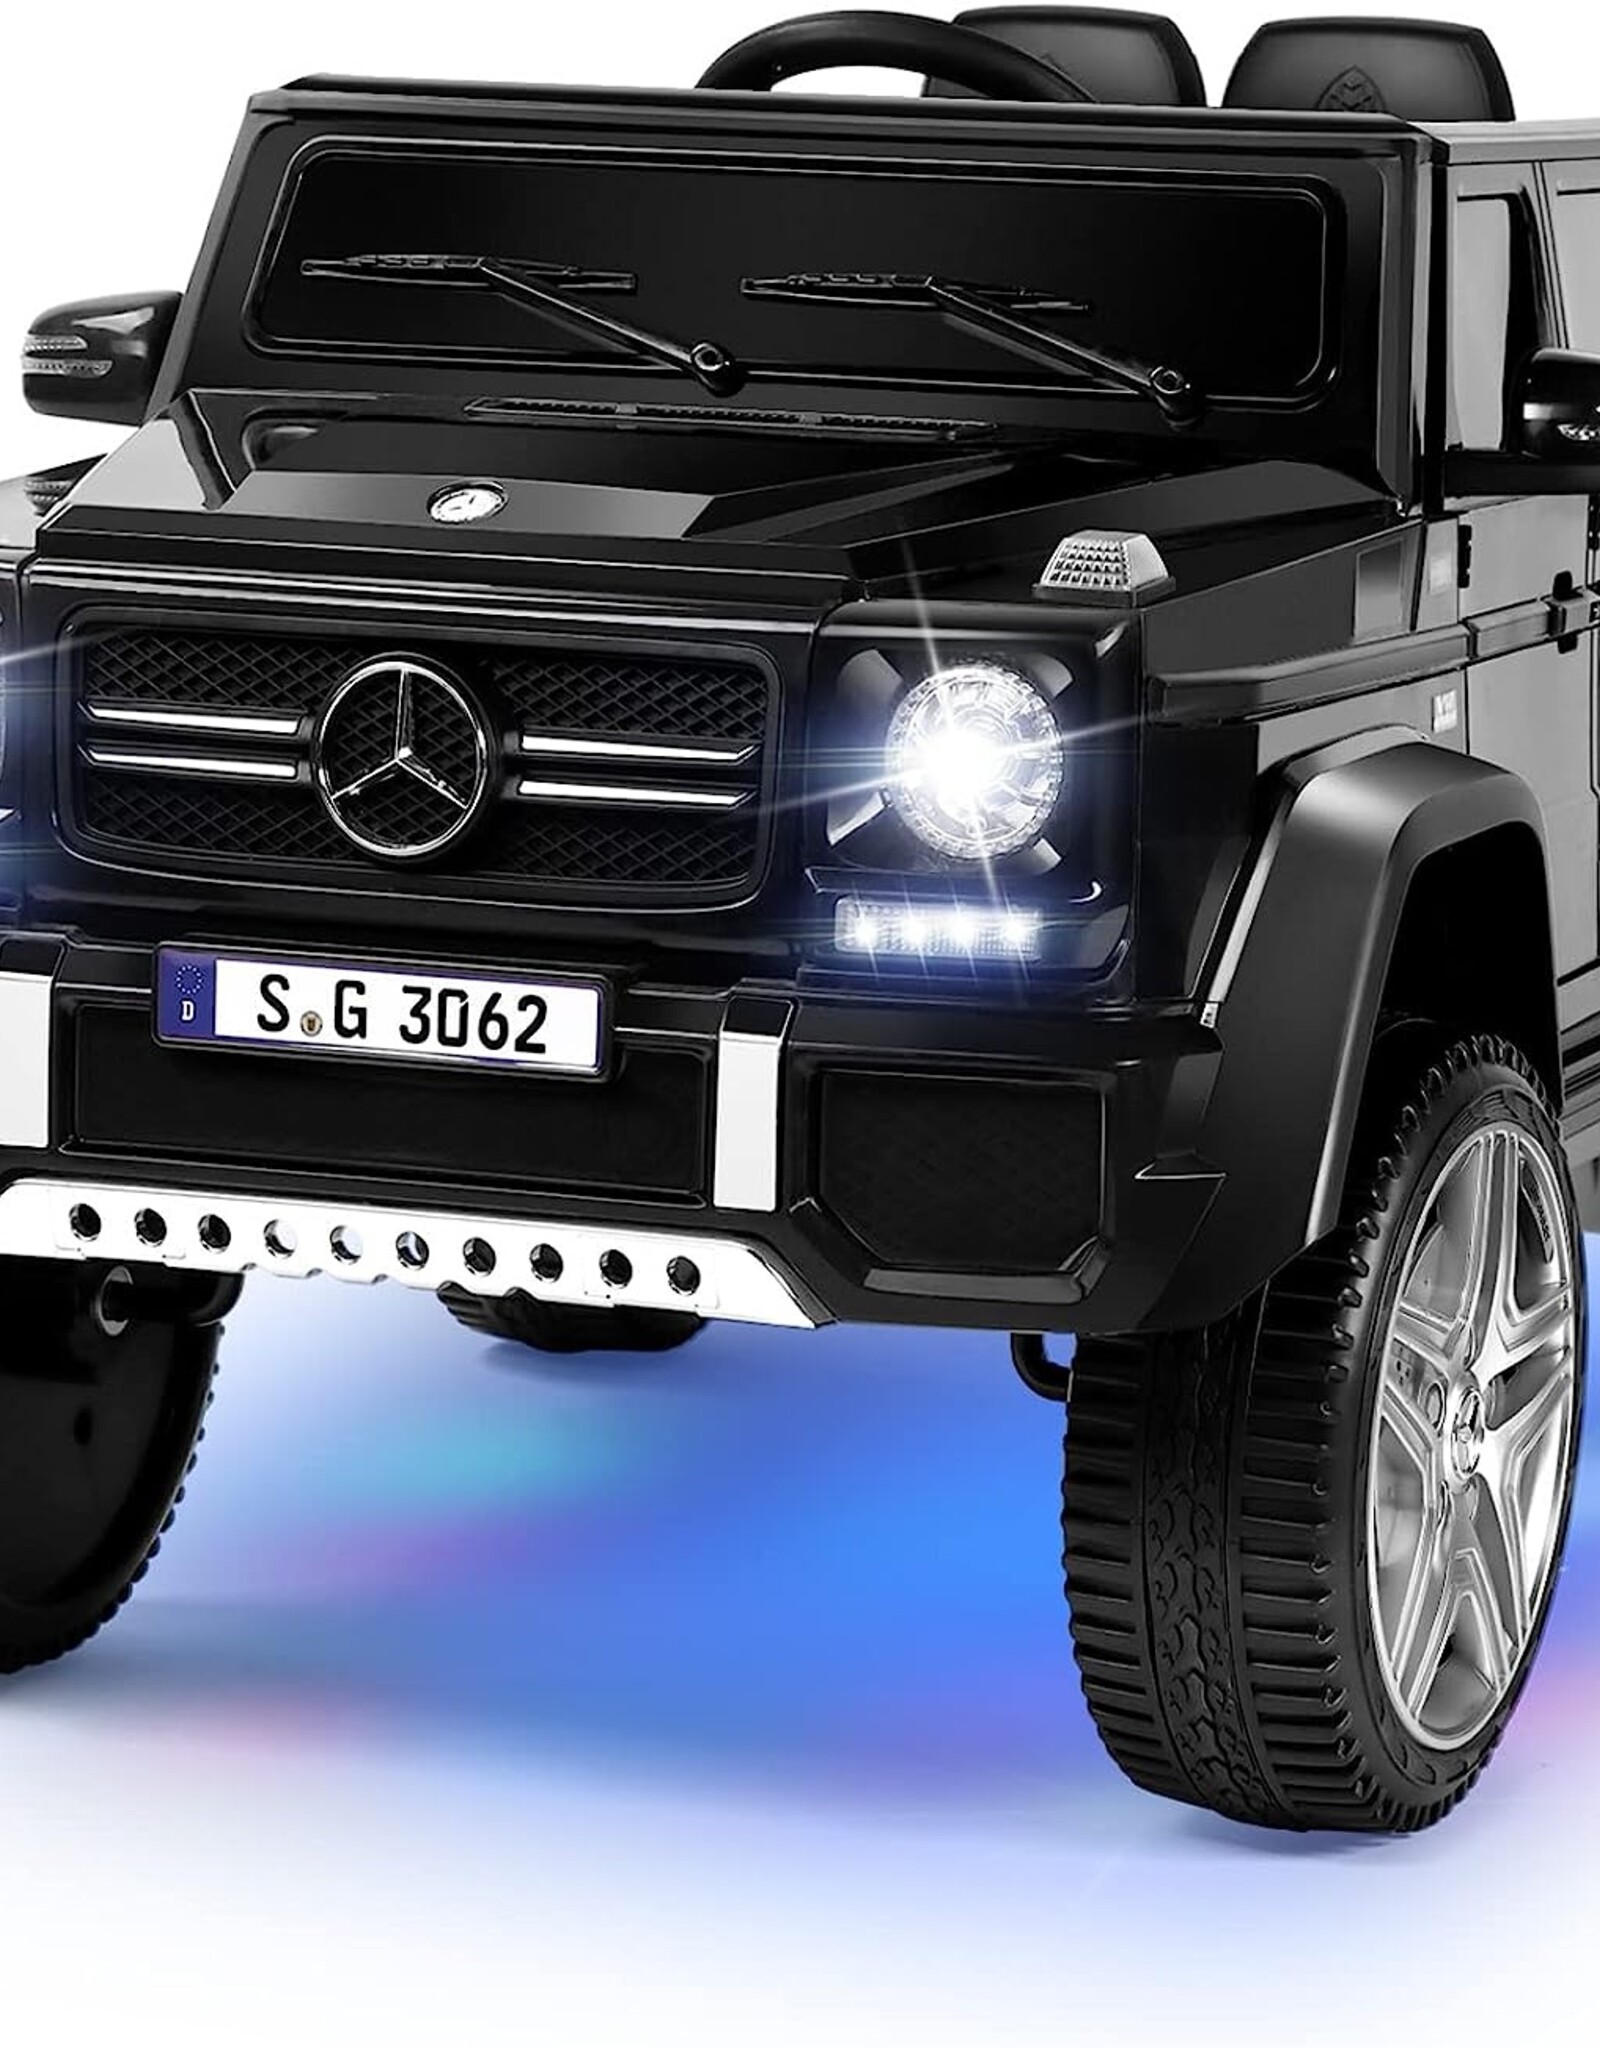 JOYLDIAS Kids Ride On Cars, Licensed Mercedes-Benz Maybach G650S, 12V7AH Battery Powered Toy Electric Car for Kids with 2.4GHz Remote Control, 2 Motors, 3 Speeds, Lock, Music, Horn, LED Lights, Black